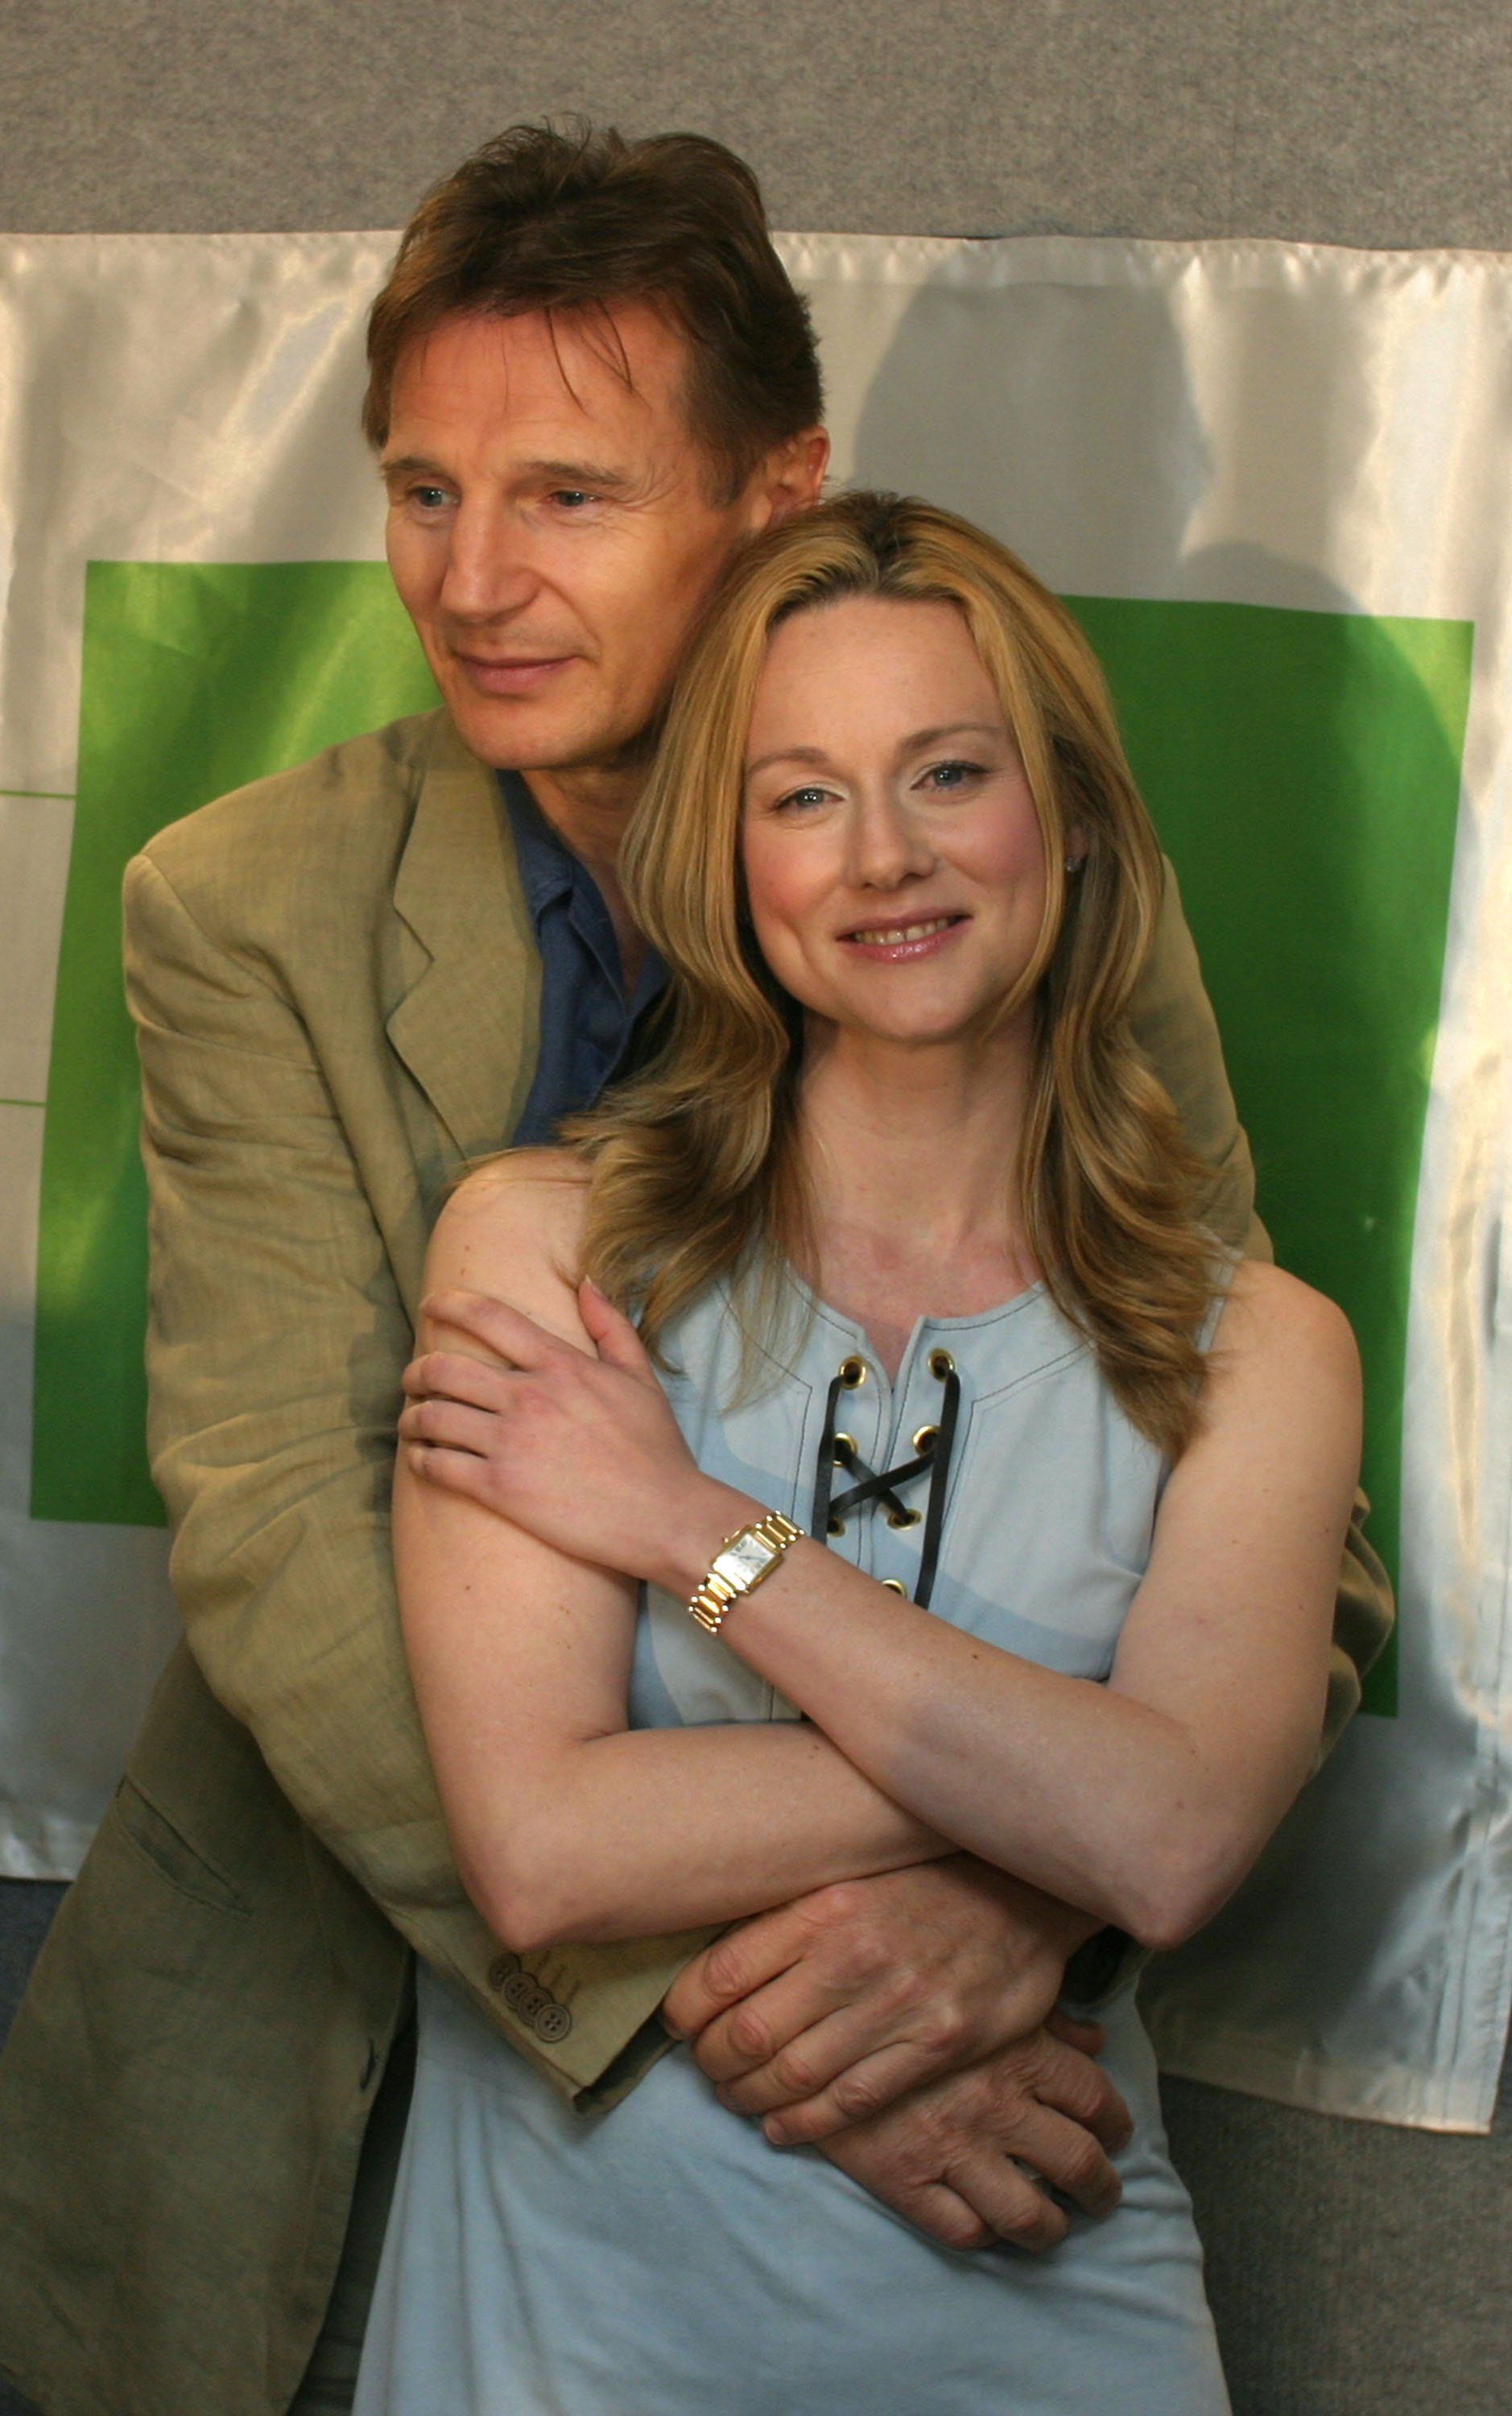 Liam Neeson and Laura Linney during the 29th annual Toronto International Film Festival on September 13, 2004 in Toronto, Ontario, Canada. / Source: Getty Images